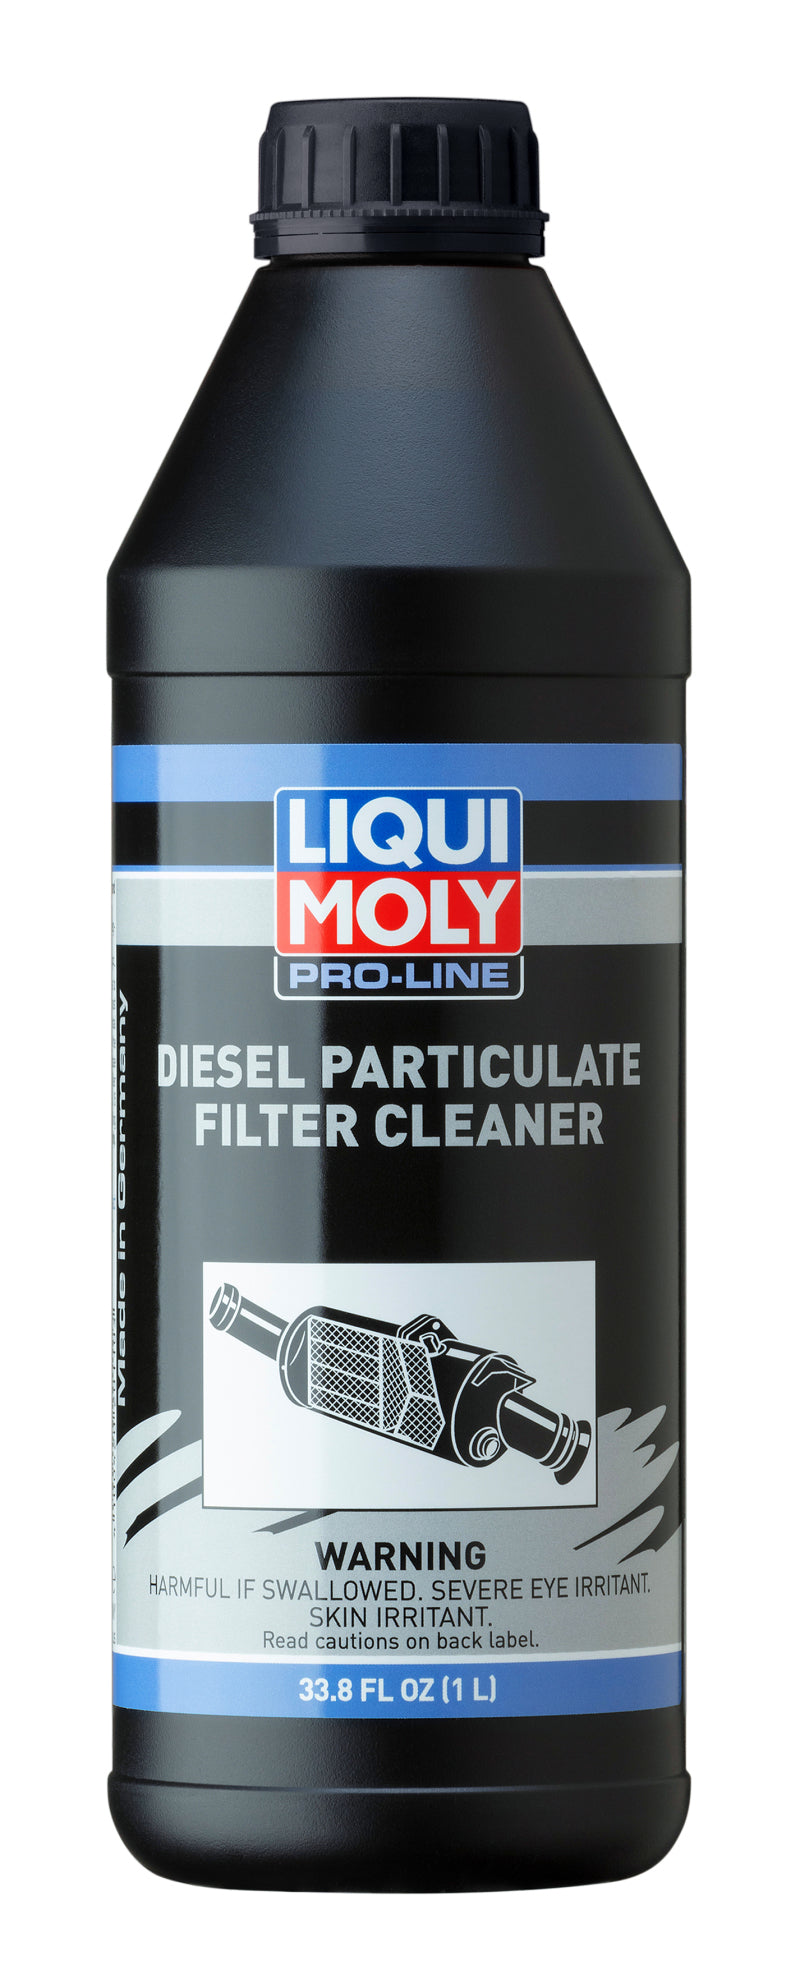 LIQUI MOLY 1L Pro-Line Diesel Particulate Filter Cleaner.